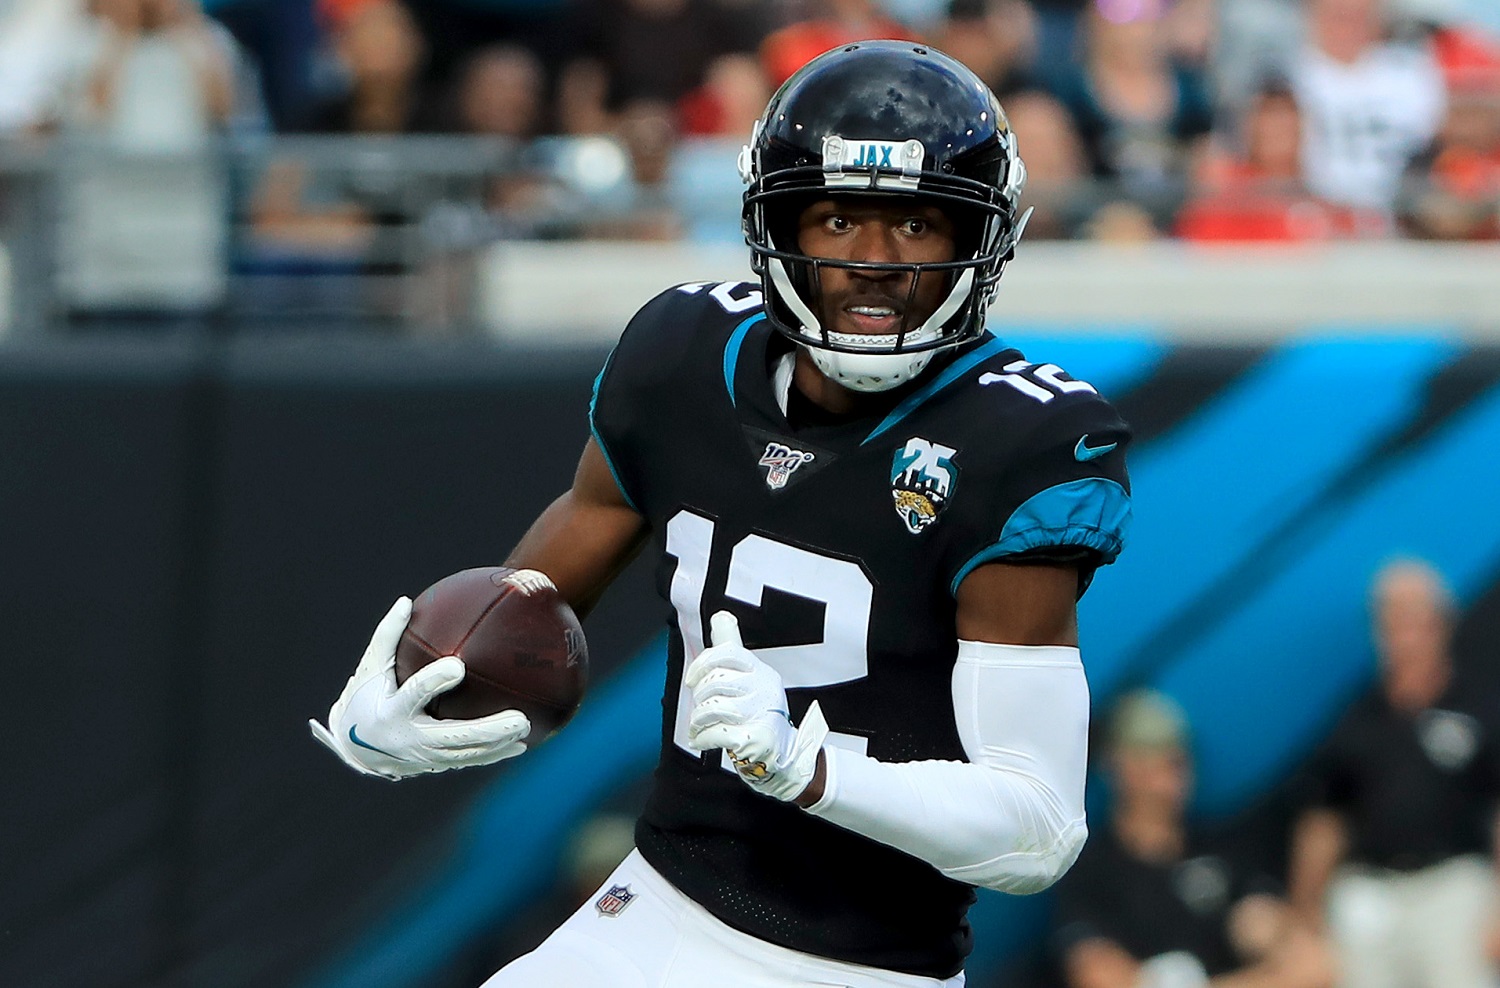 Dede Westbrook joined the Jacksonville Jaguars out of Oklahoma. He's now heading to the Minnesota Vikings to reunite with a former coach. | Sam Greenwood/Getty Images